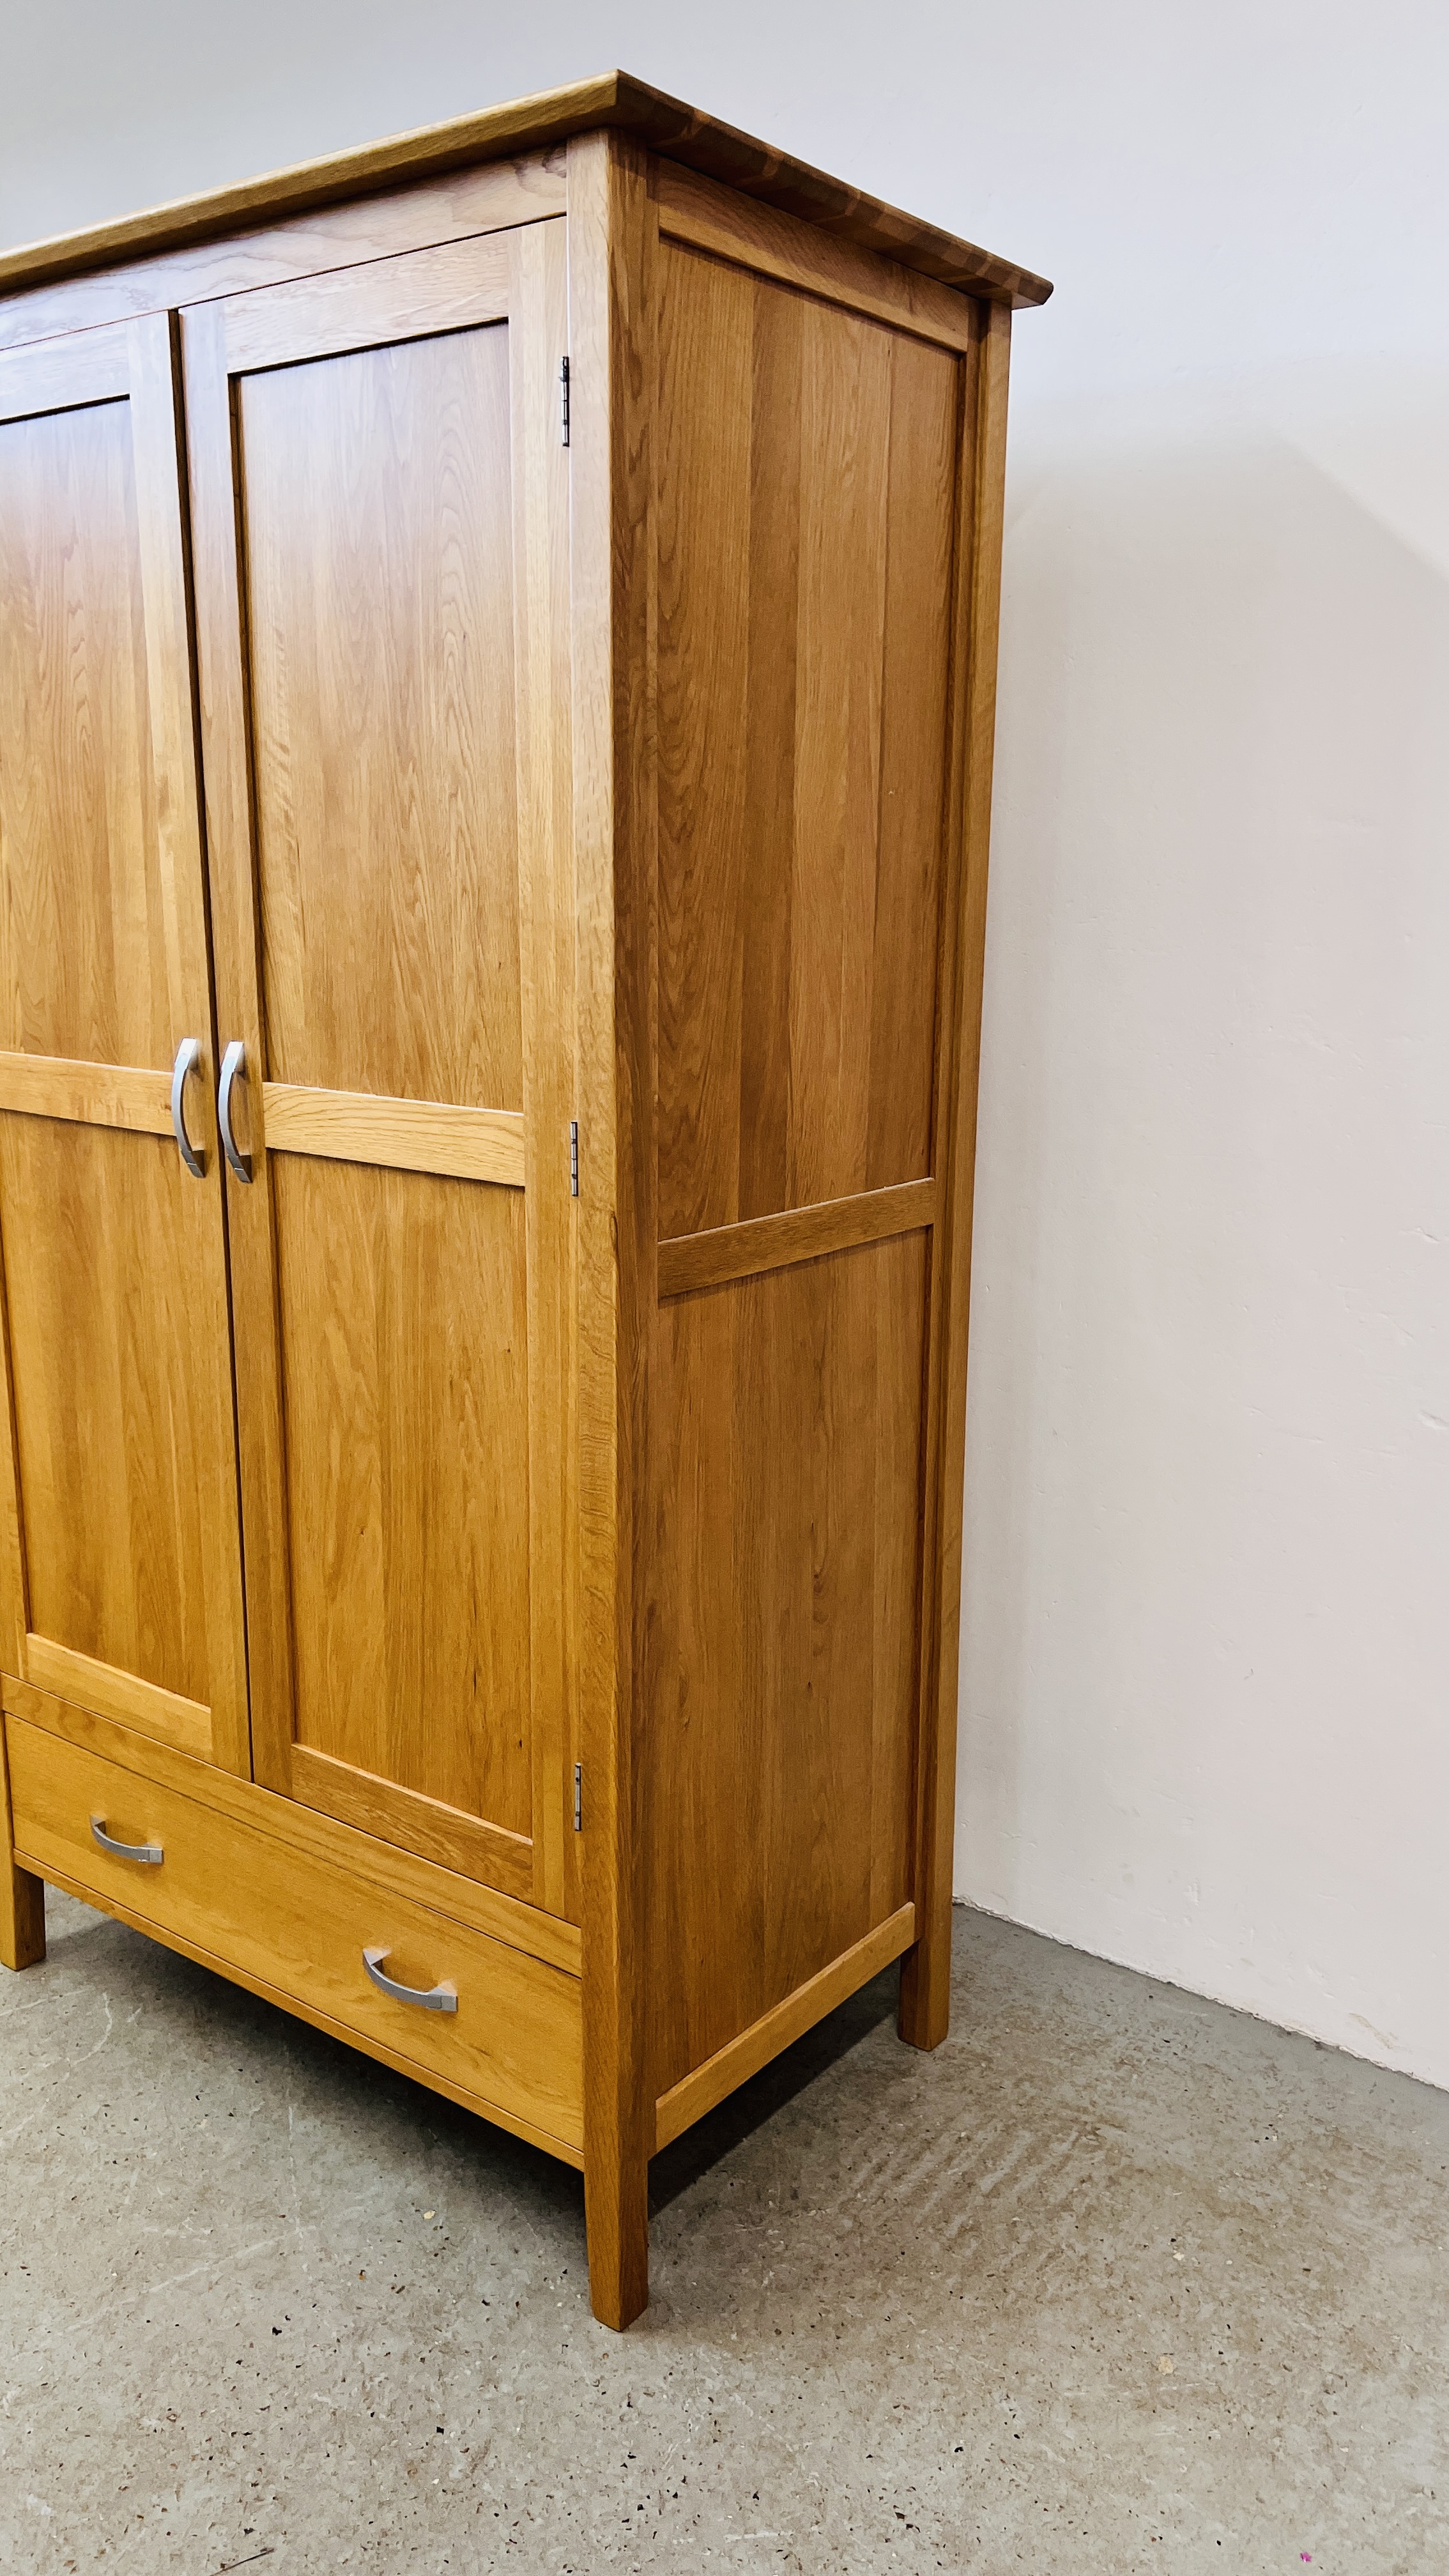 A SOLID LIGHT OAK DOUBLE WARDROBE WITH DRAWER TO BASE, W - 110CM, D - 60CM, H - 191CM. - Image 2 of 8